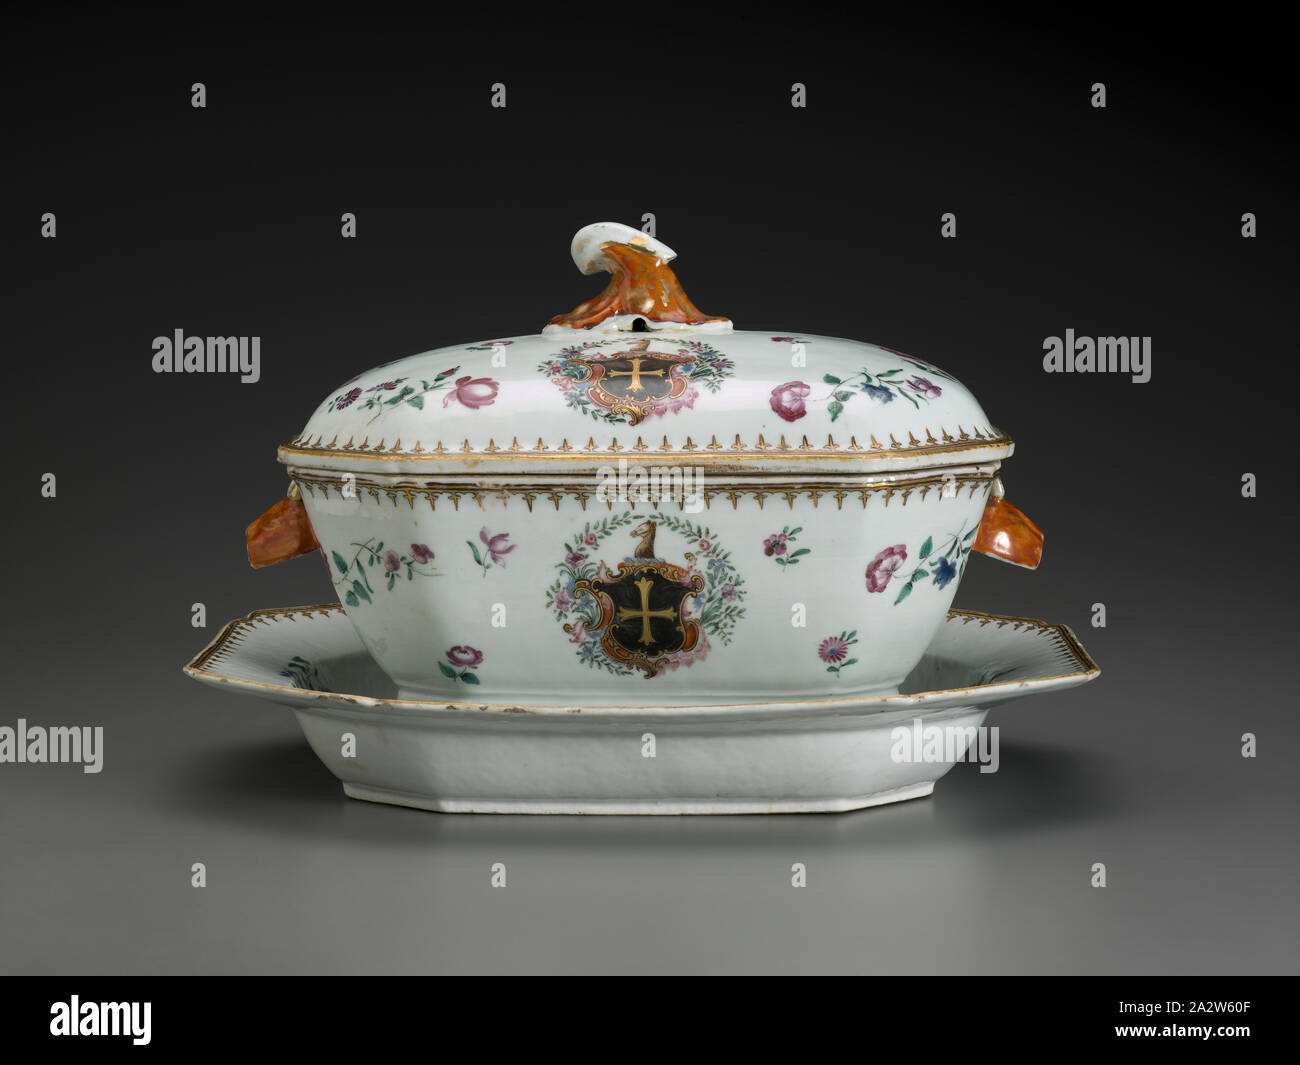 soup tureen with lid and underplate, about 1770, porcelain, A) underplate:11-3/8 x 14-3/4 x 2-1/8 in. B) tureen: 4-15/16 x 13-1/4 x 8-3/8 in. C) lid: W: 11-15/16 in., Design Arts Stock Photo